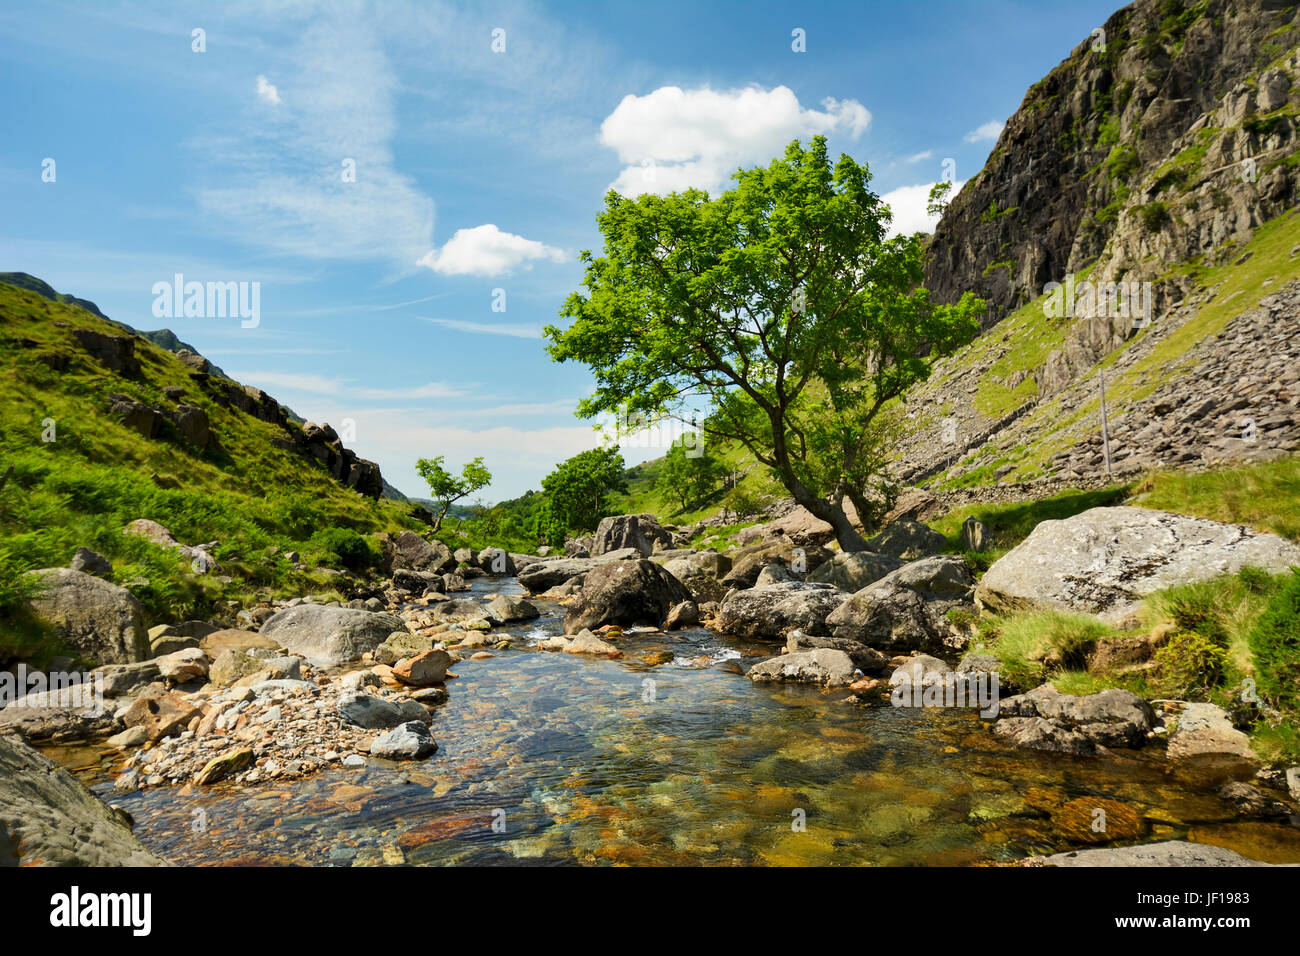 Afon Nant Peris, the river running through the rugged and scenic Llanberis Pass in Snowdonia,  Gwynedd, North Wales. Stock Photo